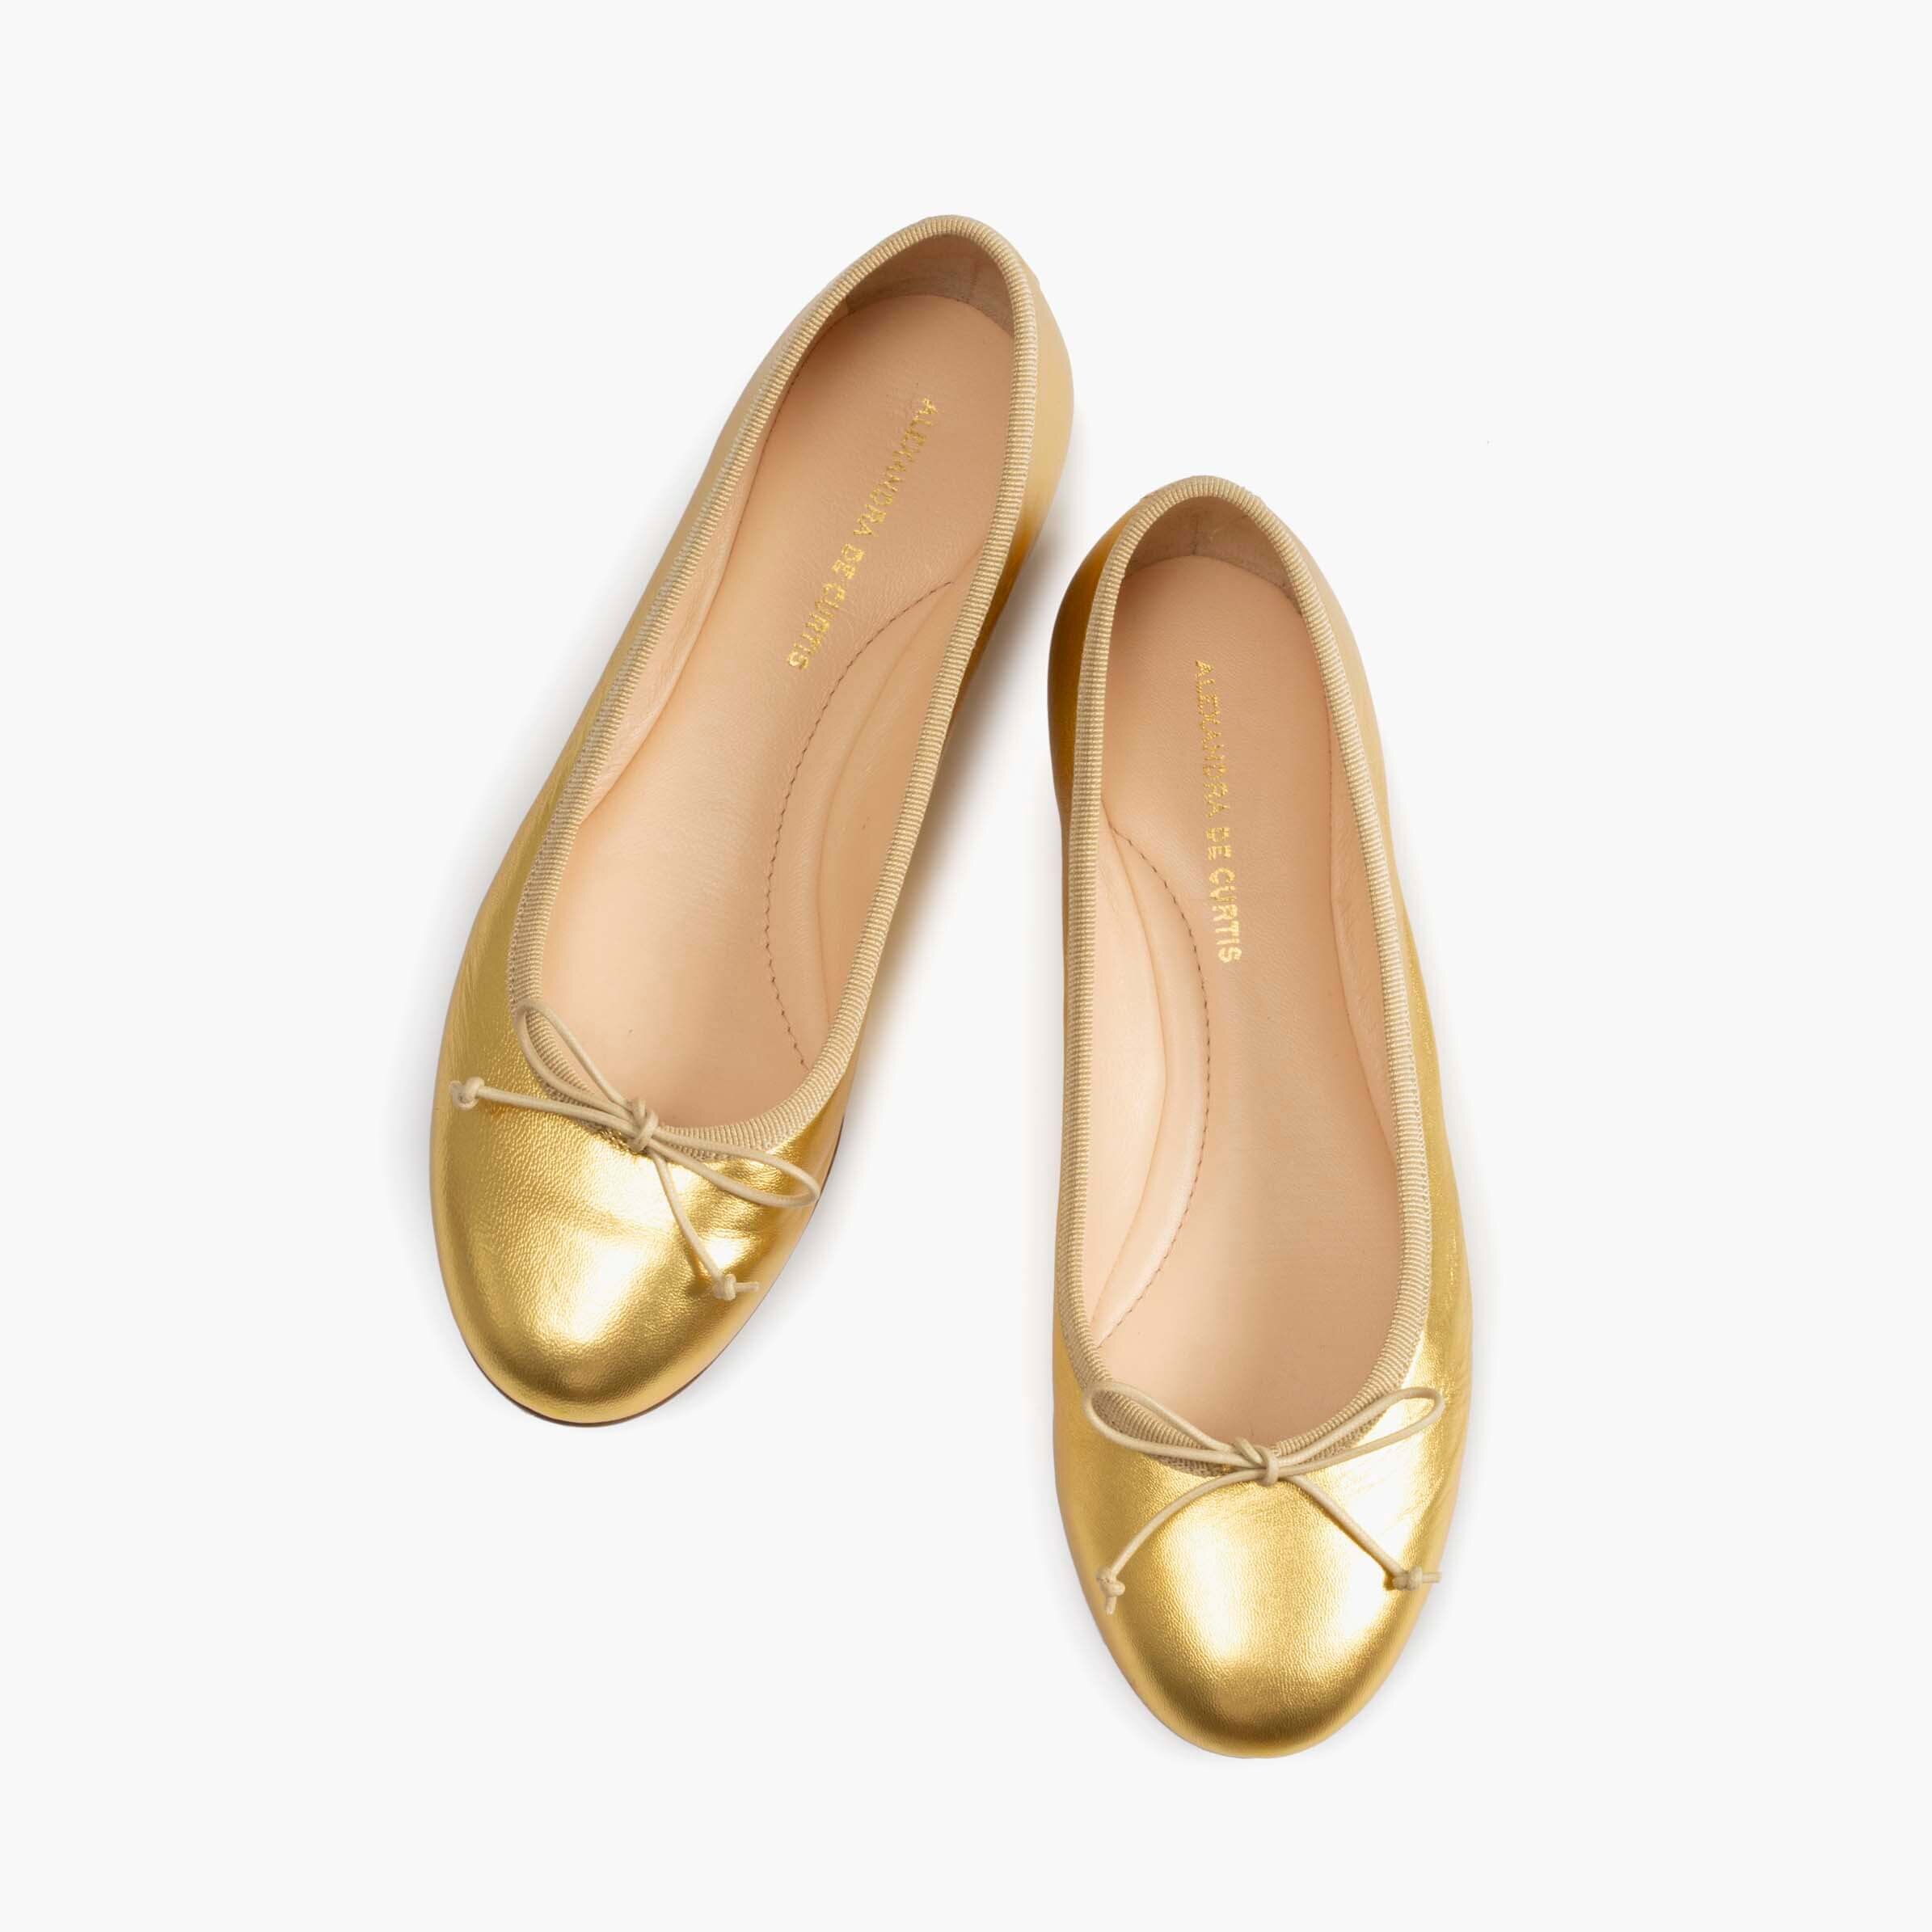 Aggregate more than 79 womens gold flat shoes super hot